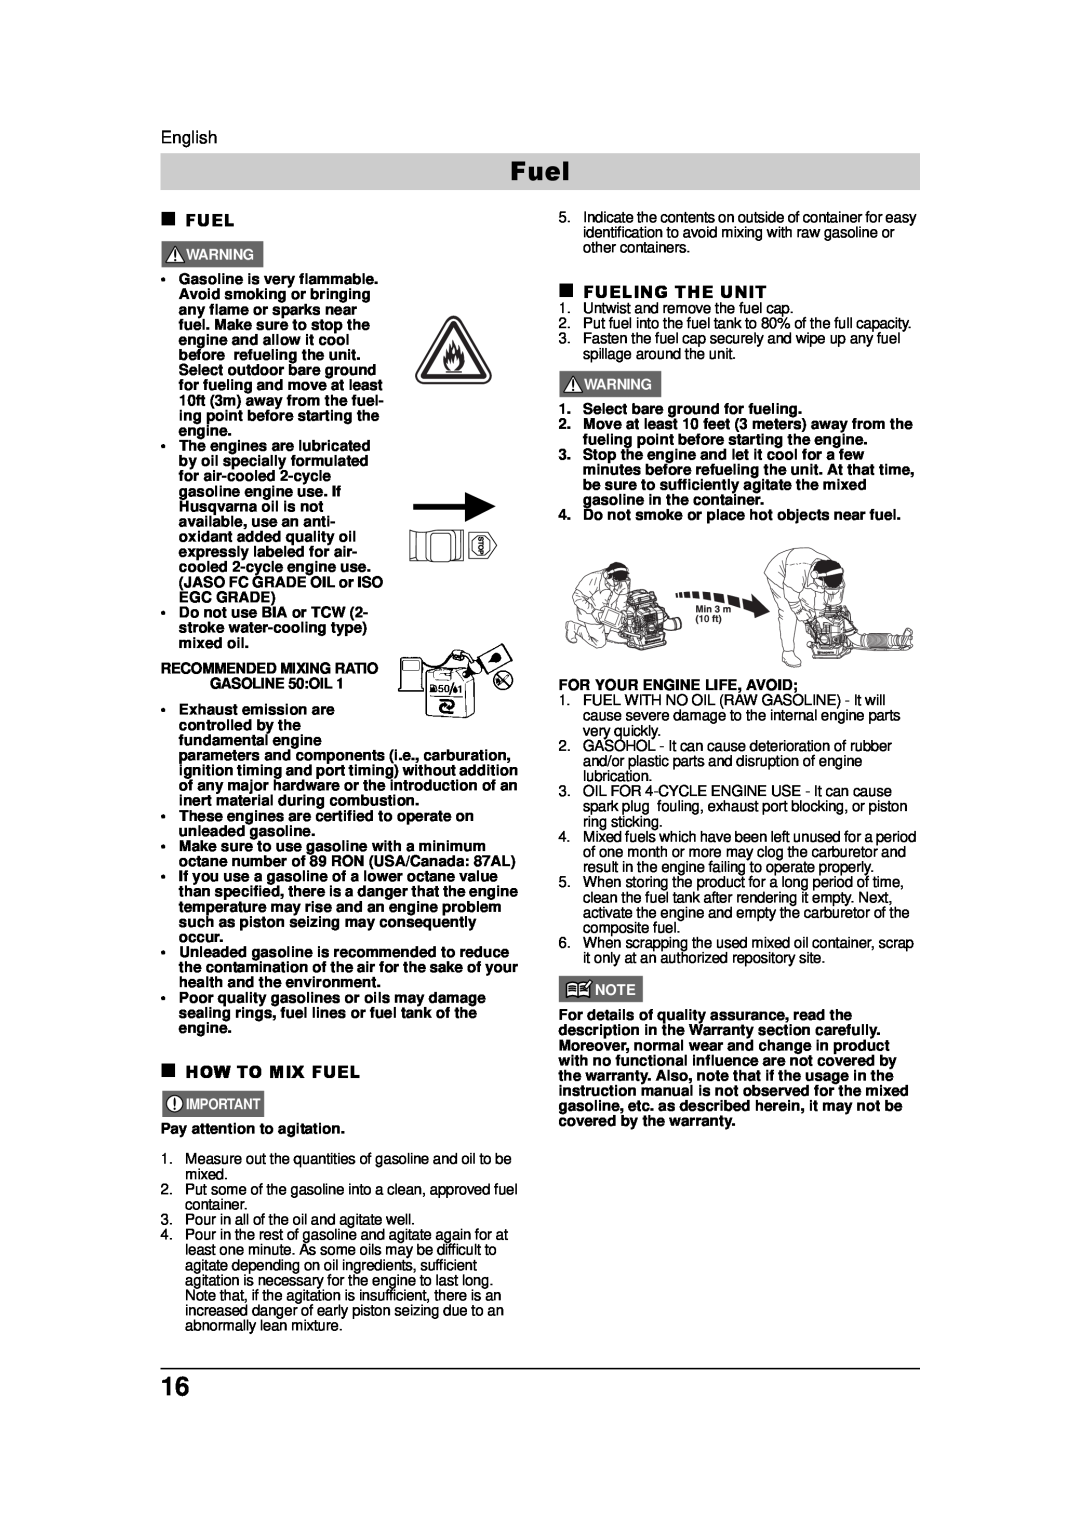 Husqvarna 115 09 83-95, 150BF, 180BF manual „ How To Mix Fuel, „ Fueling The Unit 